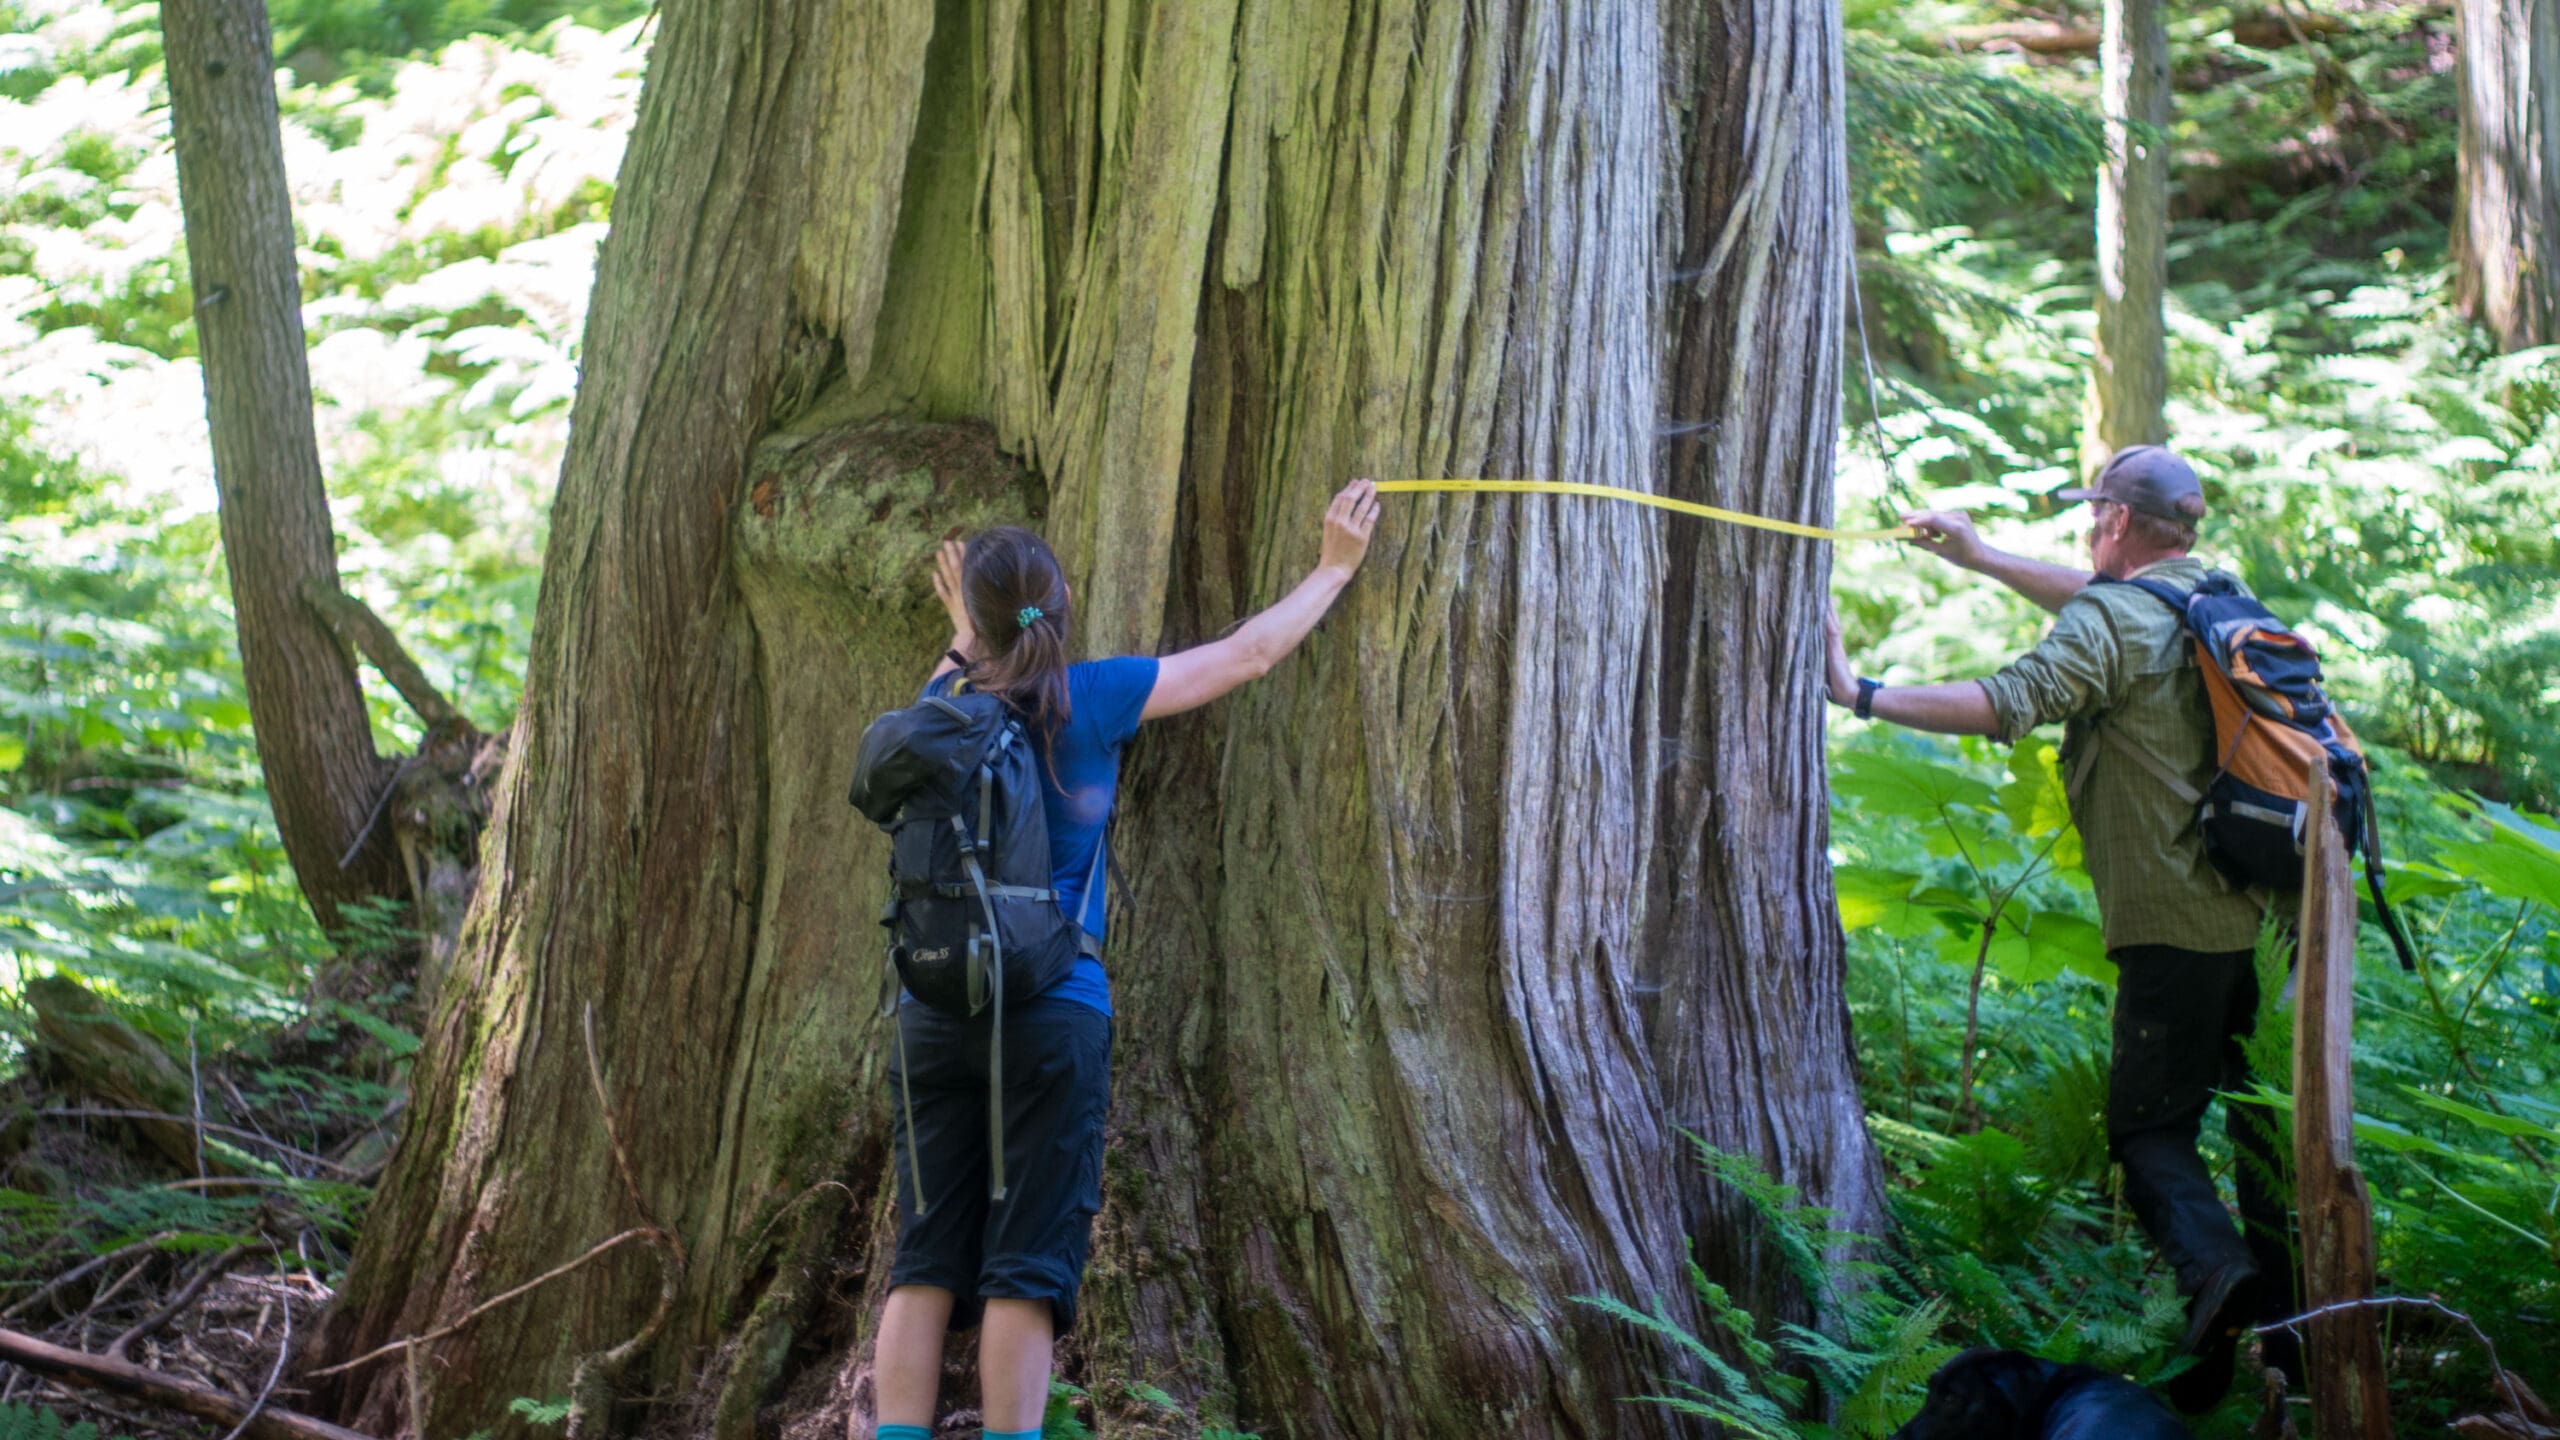 Two people measure a large old growth tree